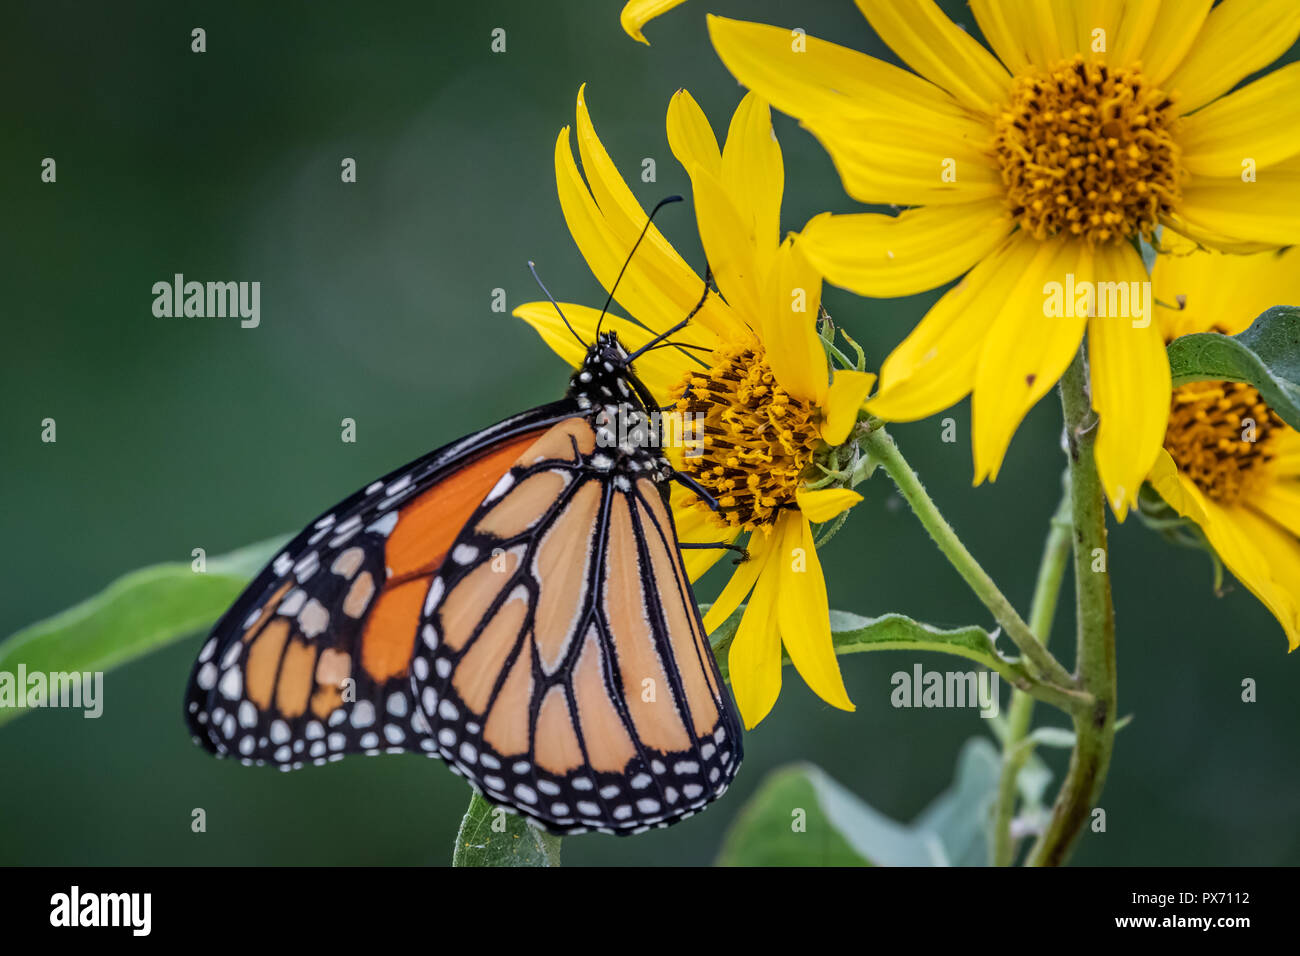 A Monarch butterfly (Danaus plexippus) perched on Sunflowers Stock Photo